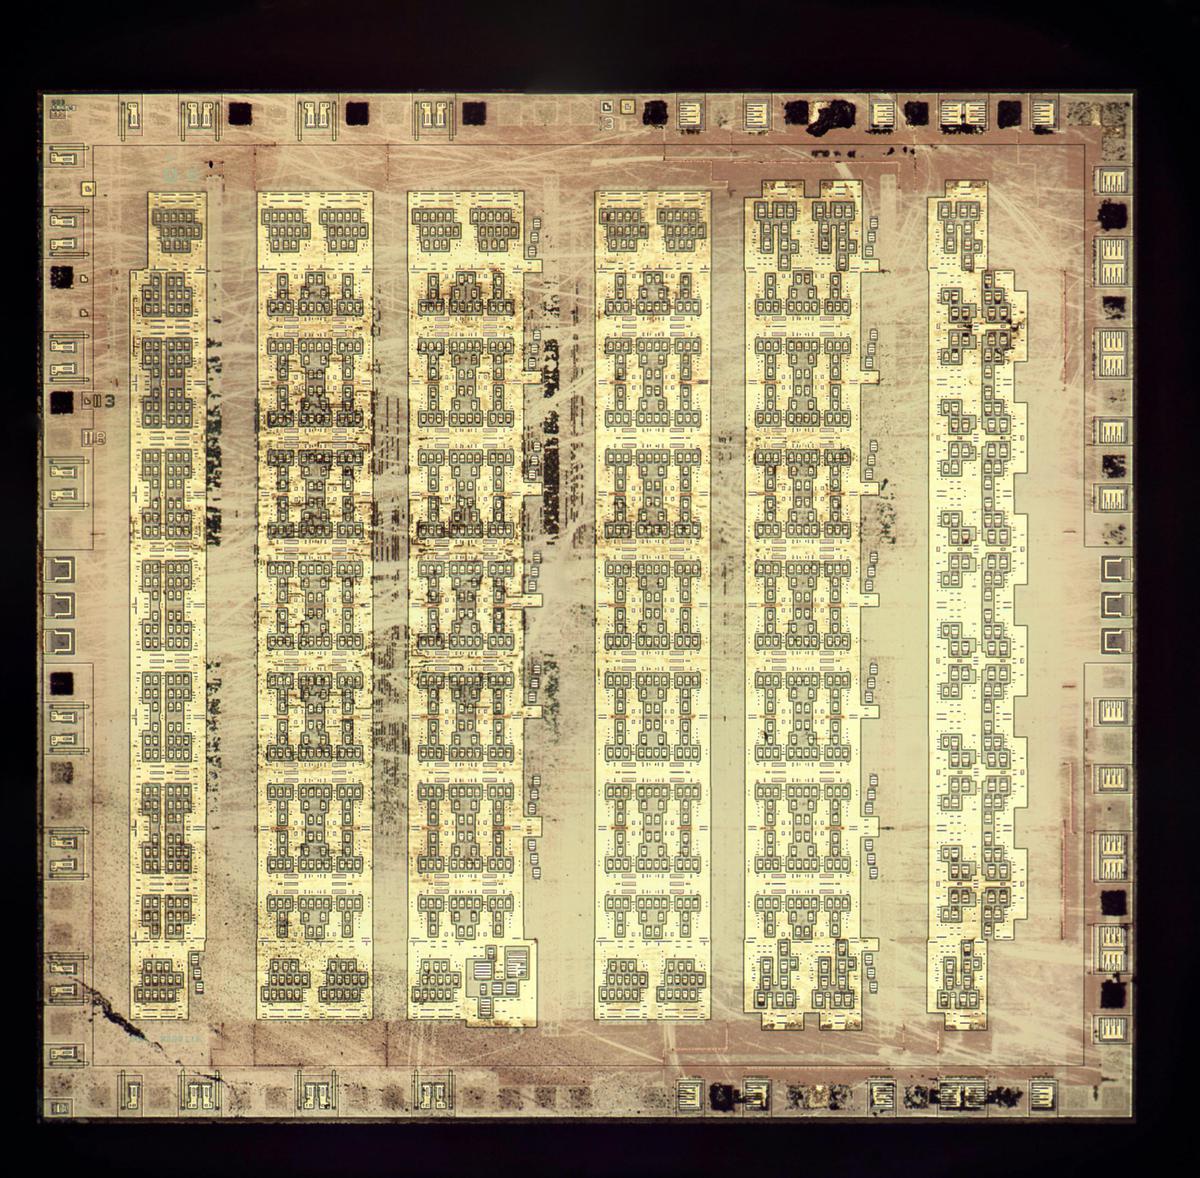 Die photo of the fake 8086 showing the underlying silicon. The metal layers were removed for this photo.